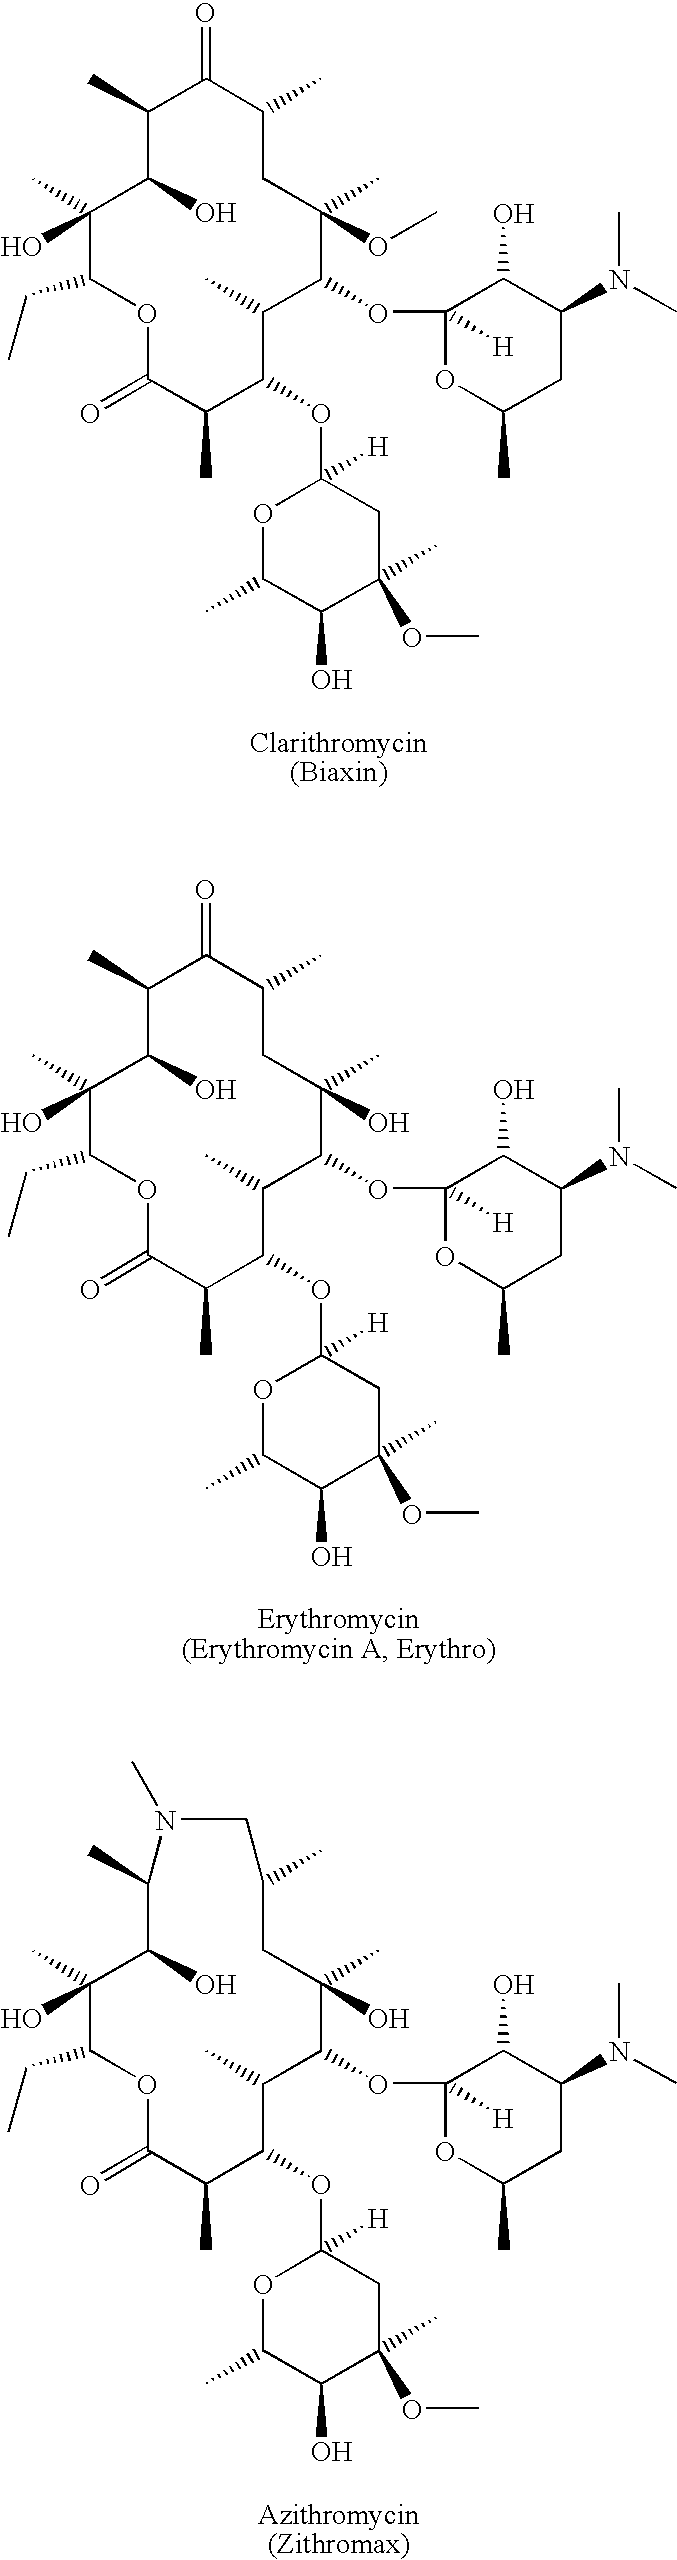 Preparation and utility of substituted erythromycin analogs